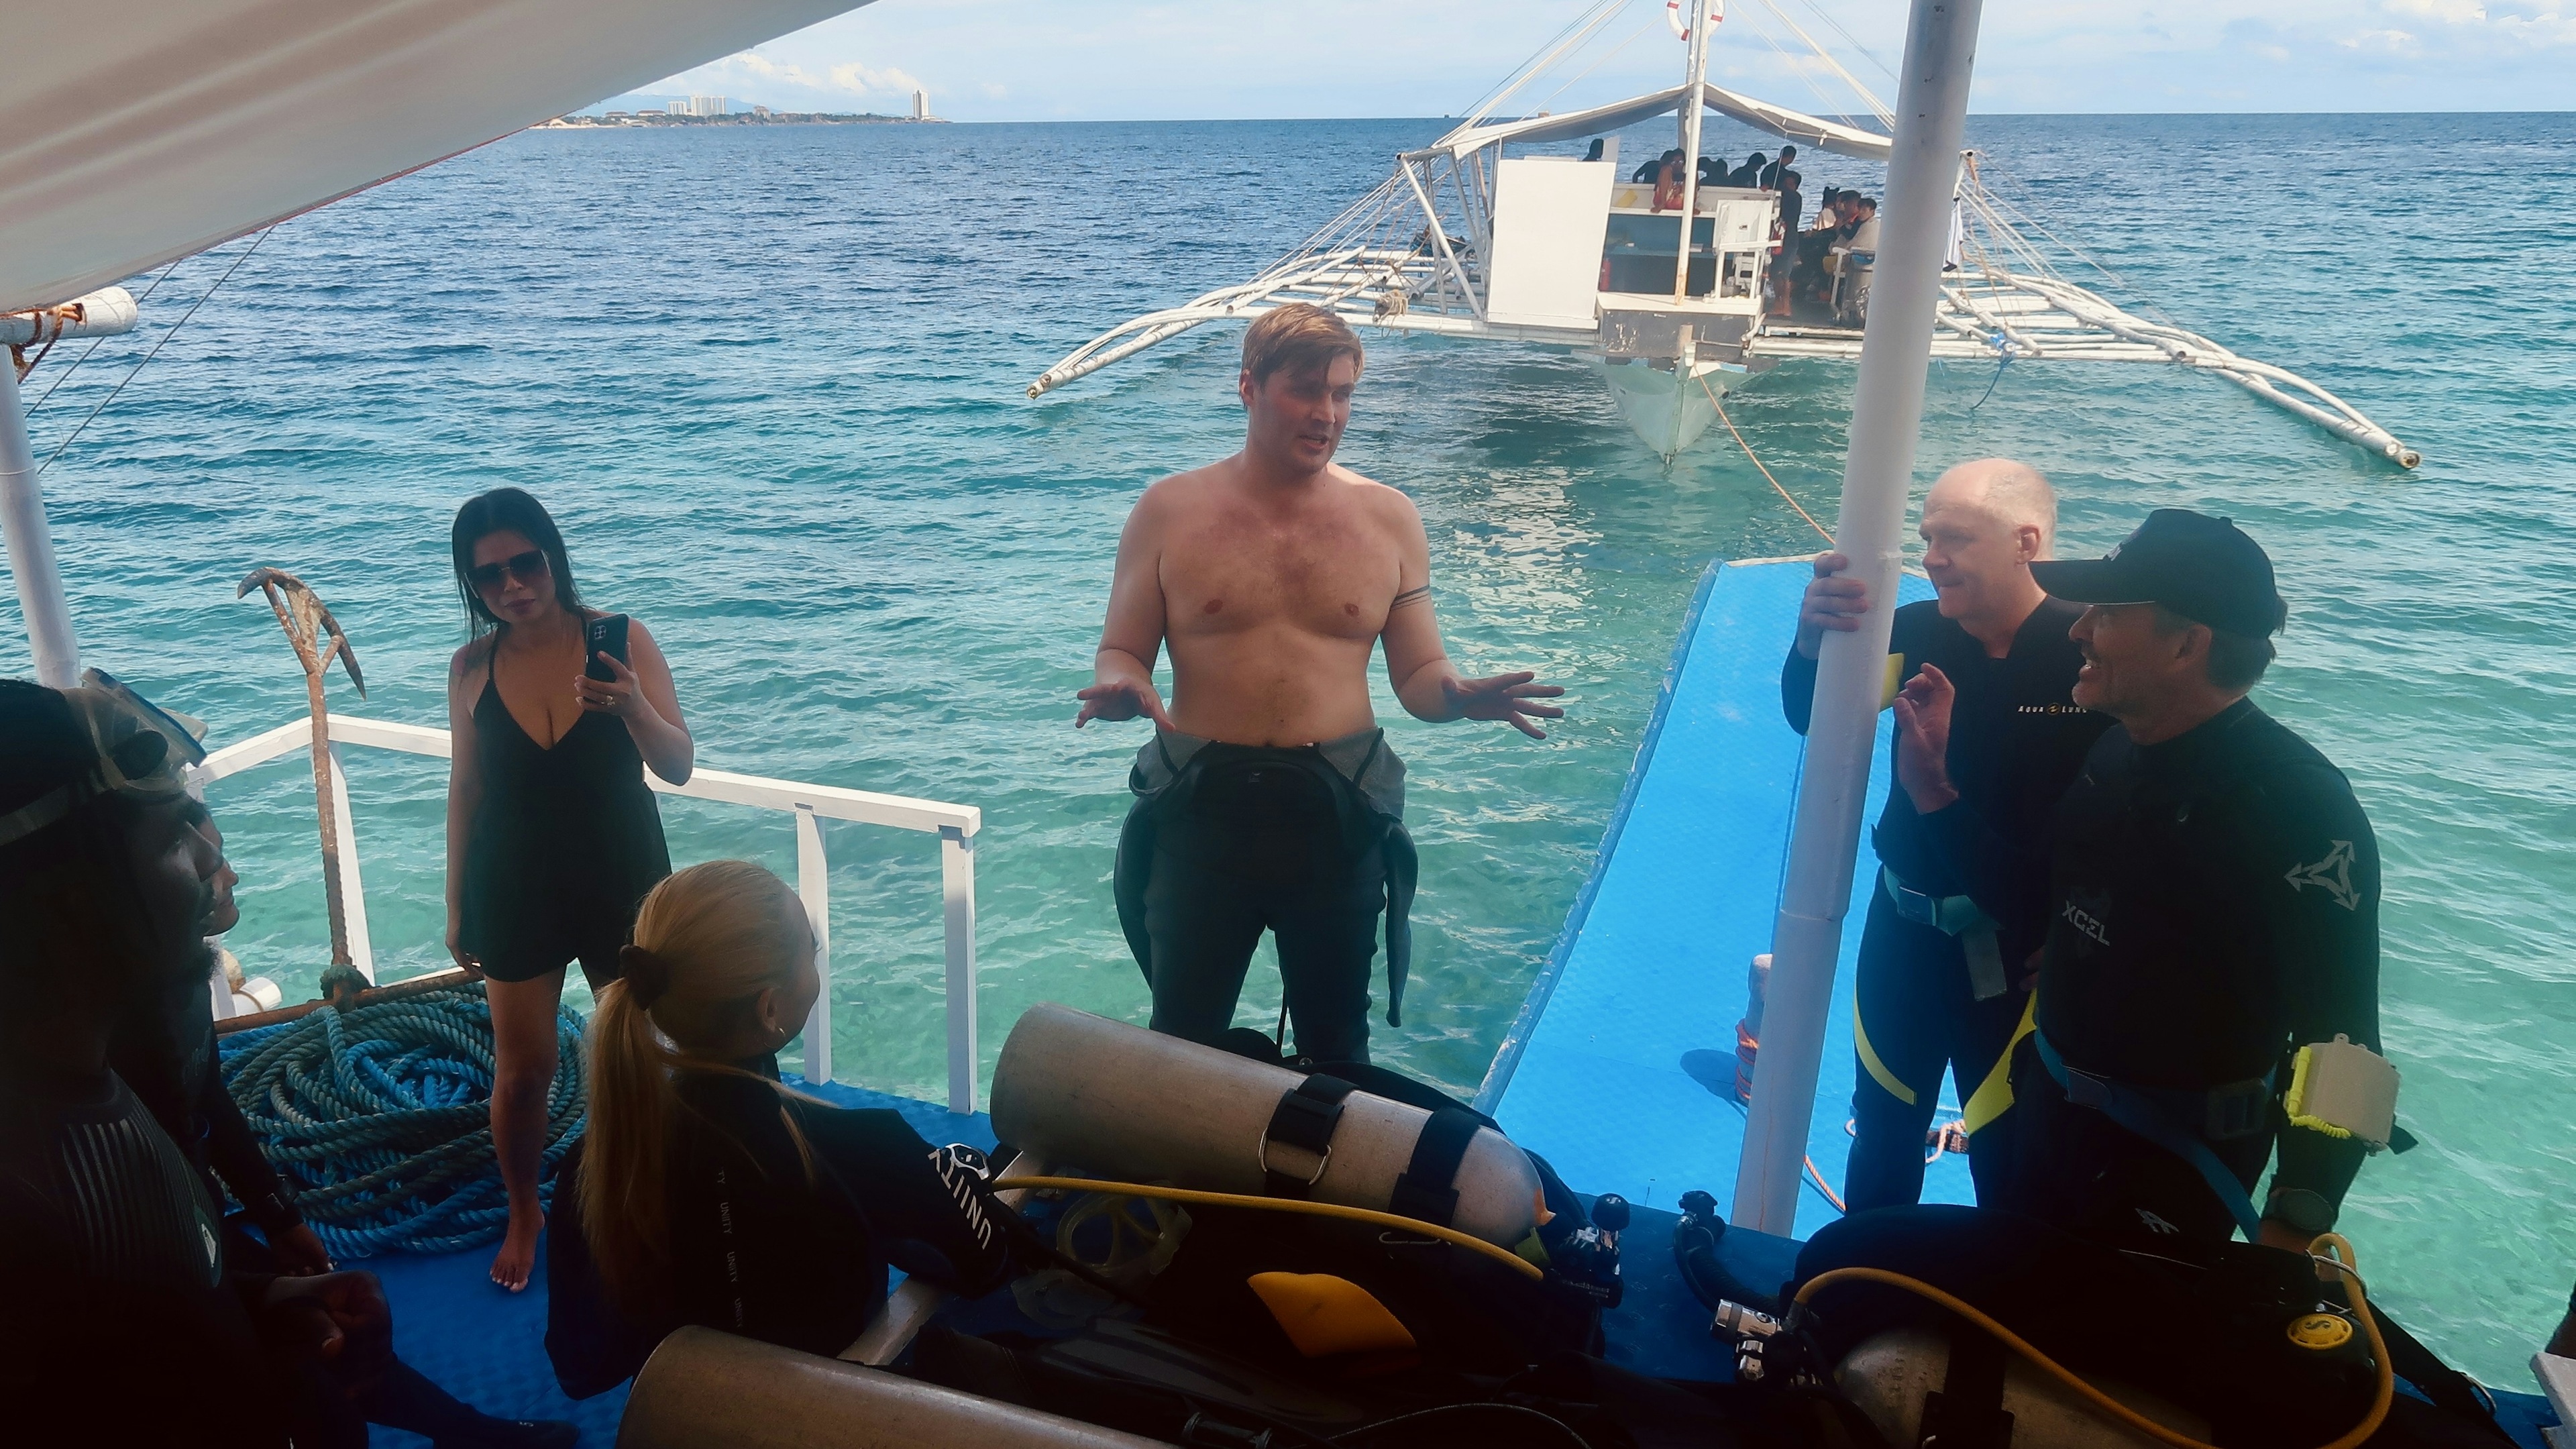 About our Dive Center and Island Hopping around Mactan